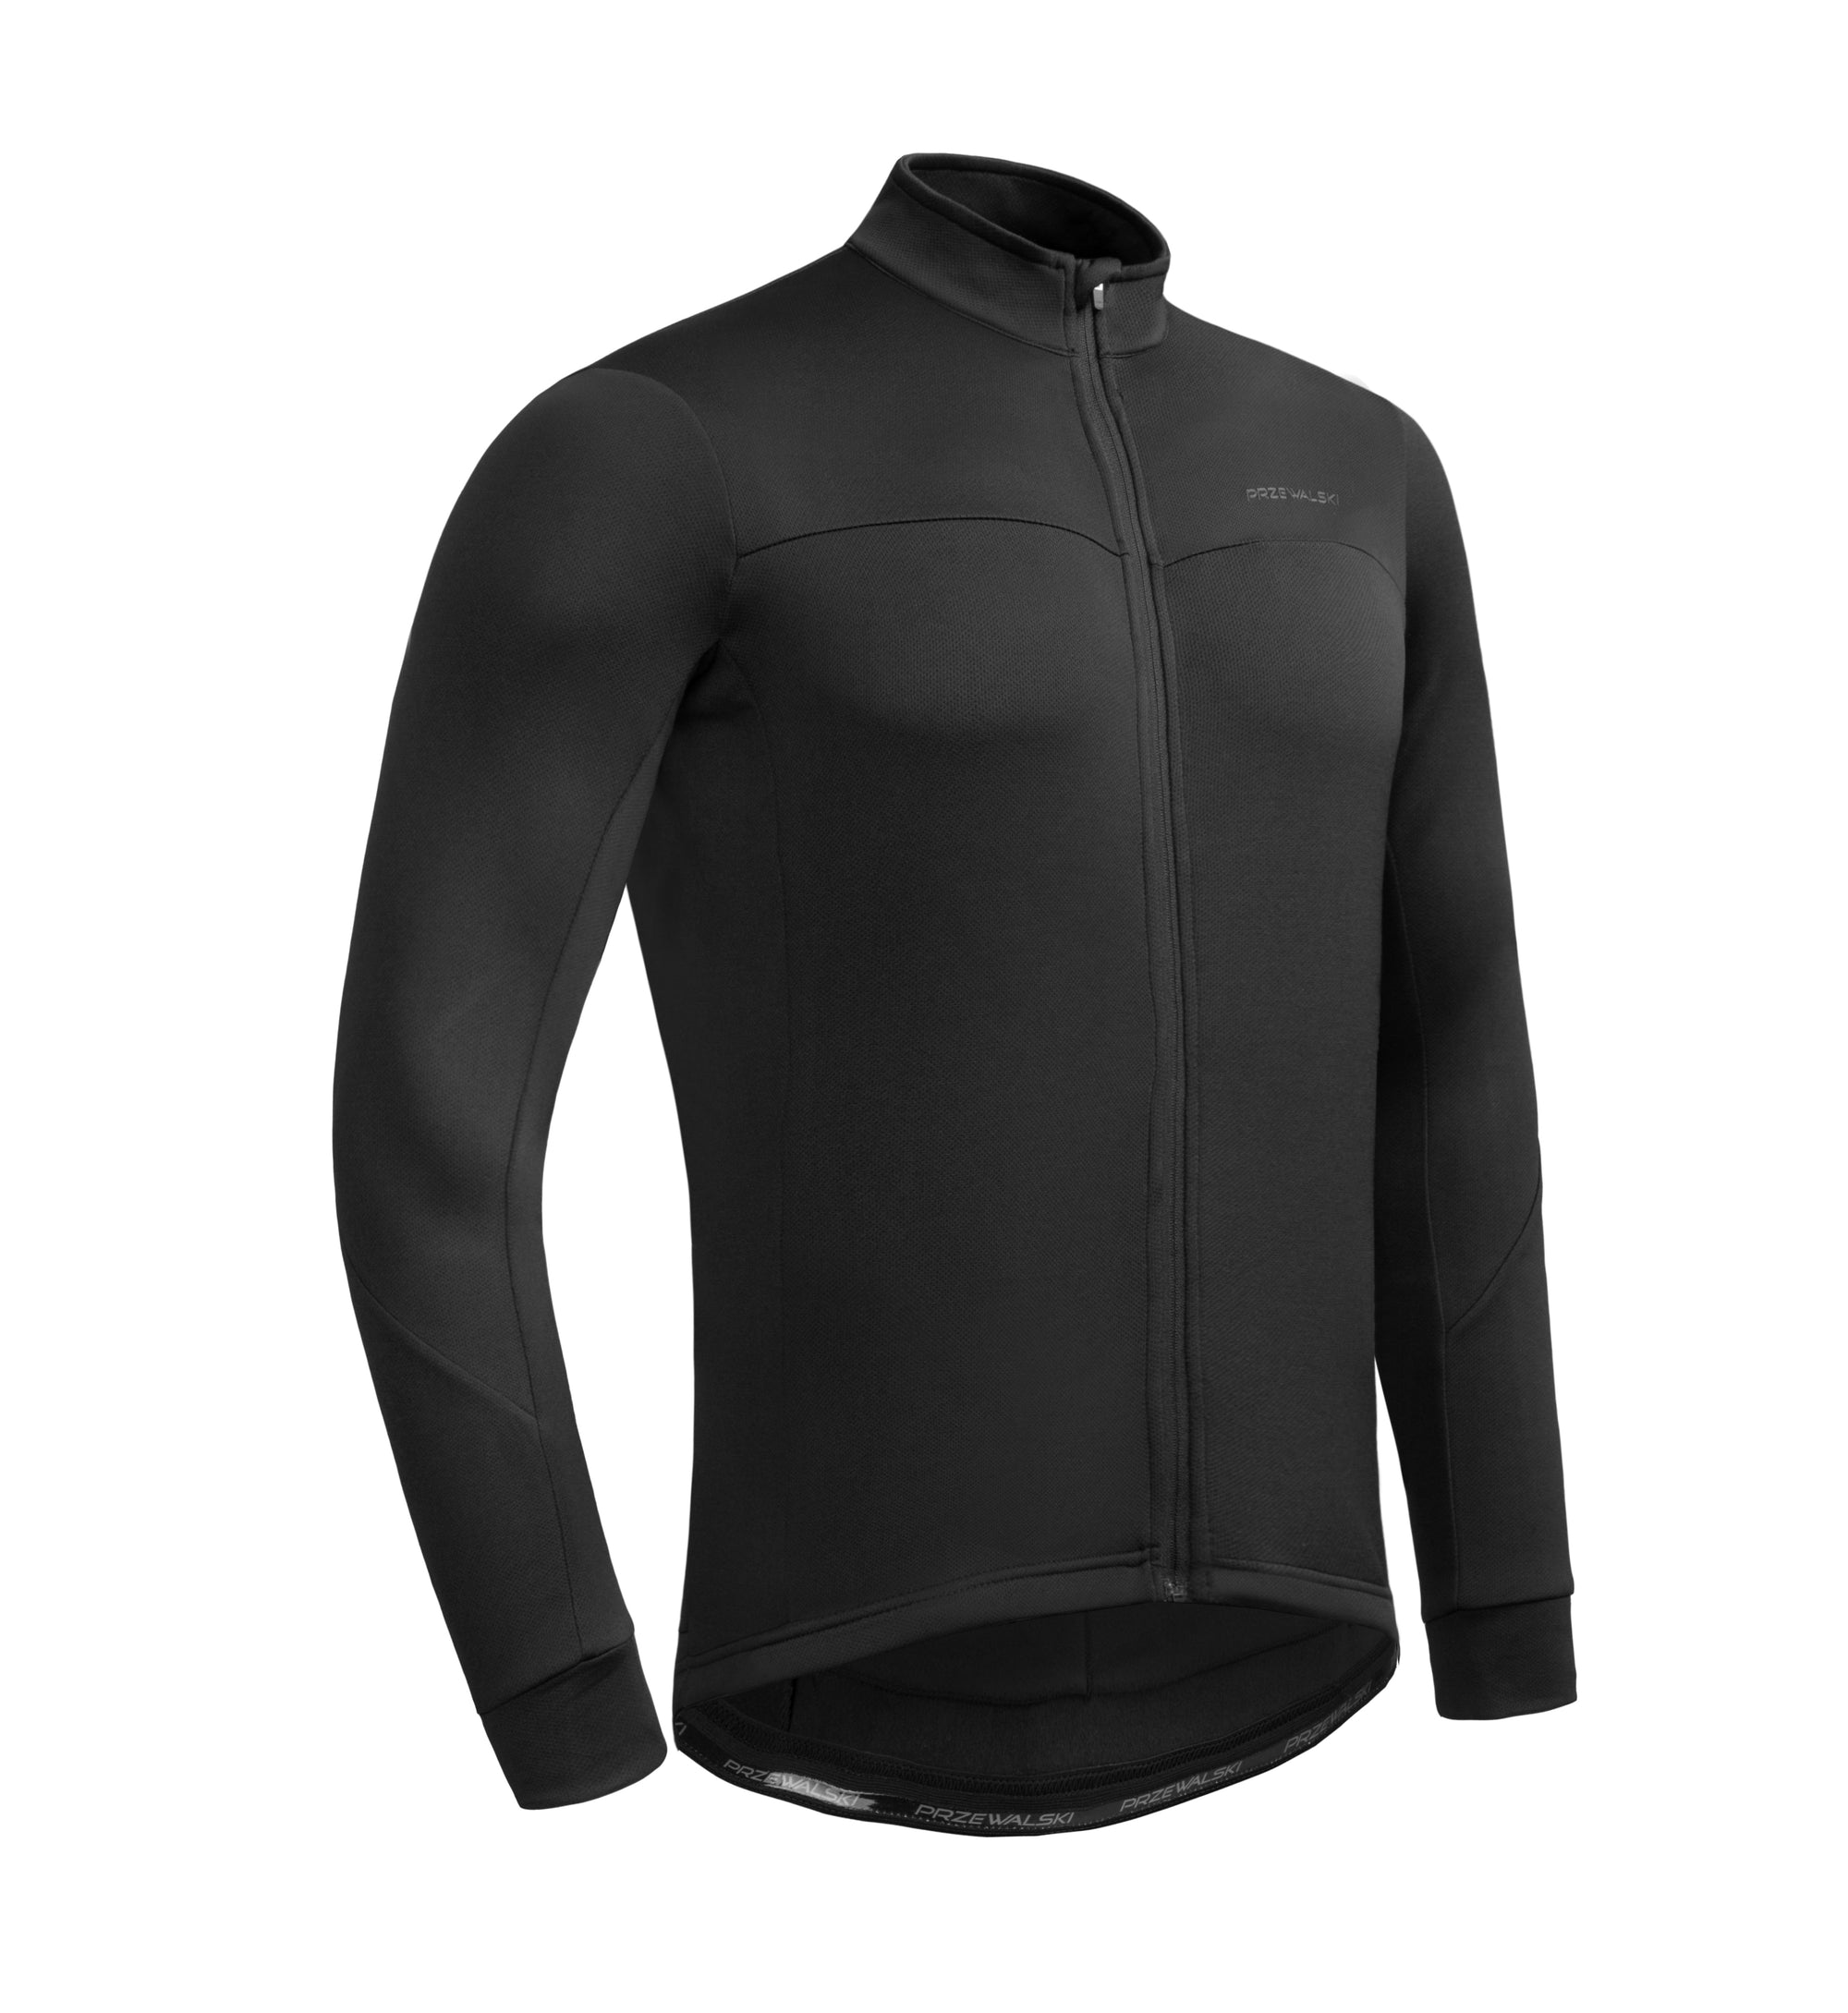 thermal long sleeve cycling jersey